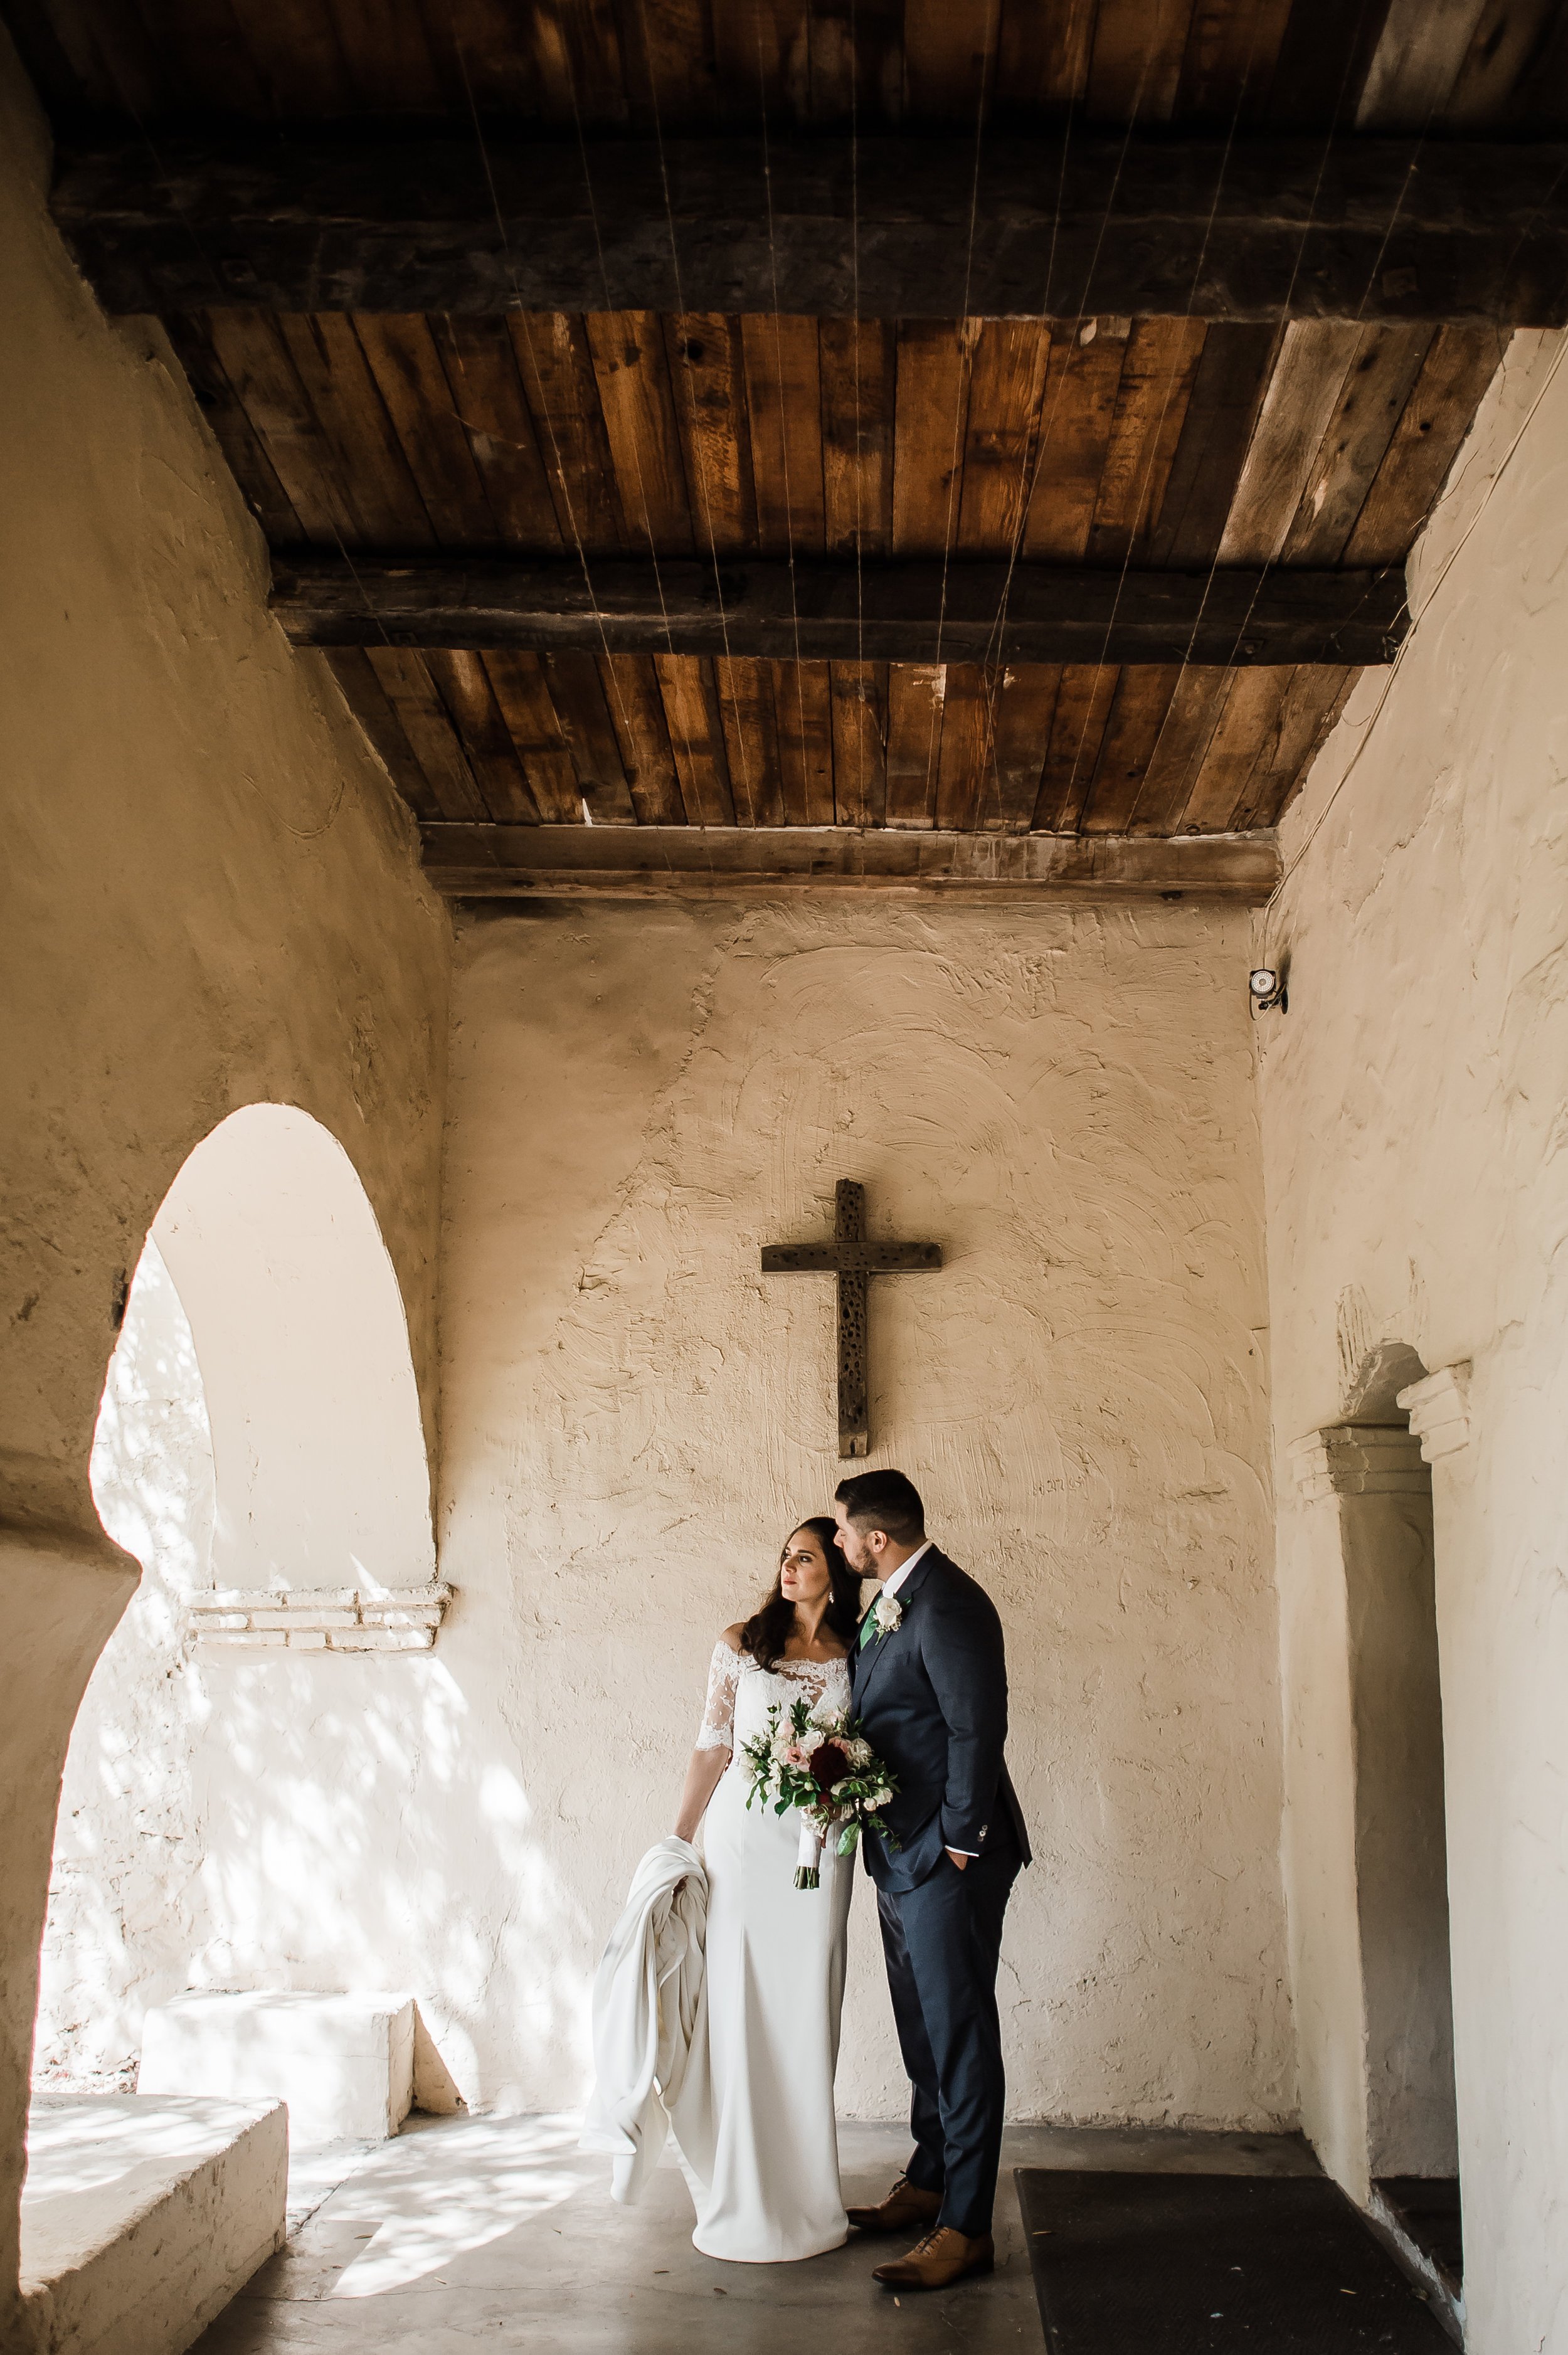 www.santabarbarawedding.com | Michelle Ramirez Photography | Old Mission Santa Ines | Amazing Day Events | Sweet Peas Flowers and Gifts | The Couple Share a Moment at the Church